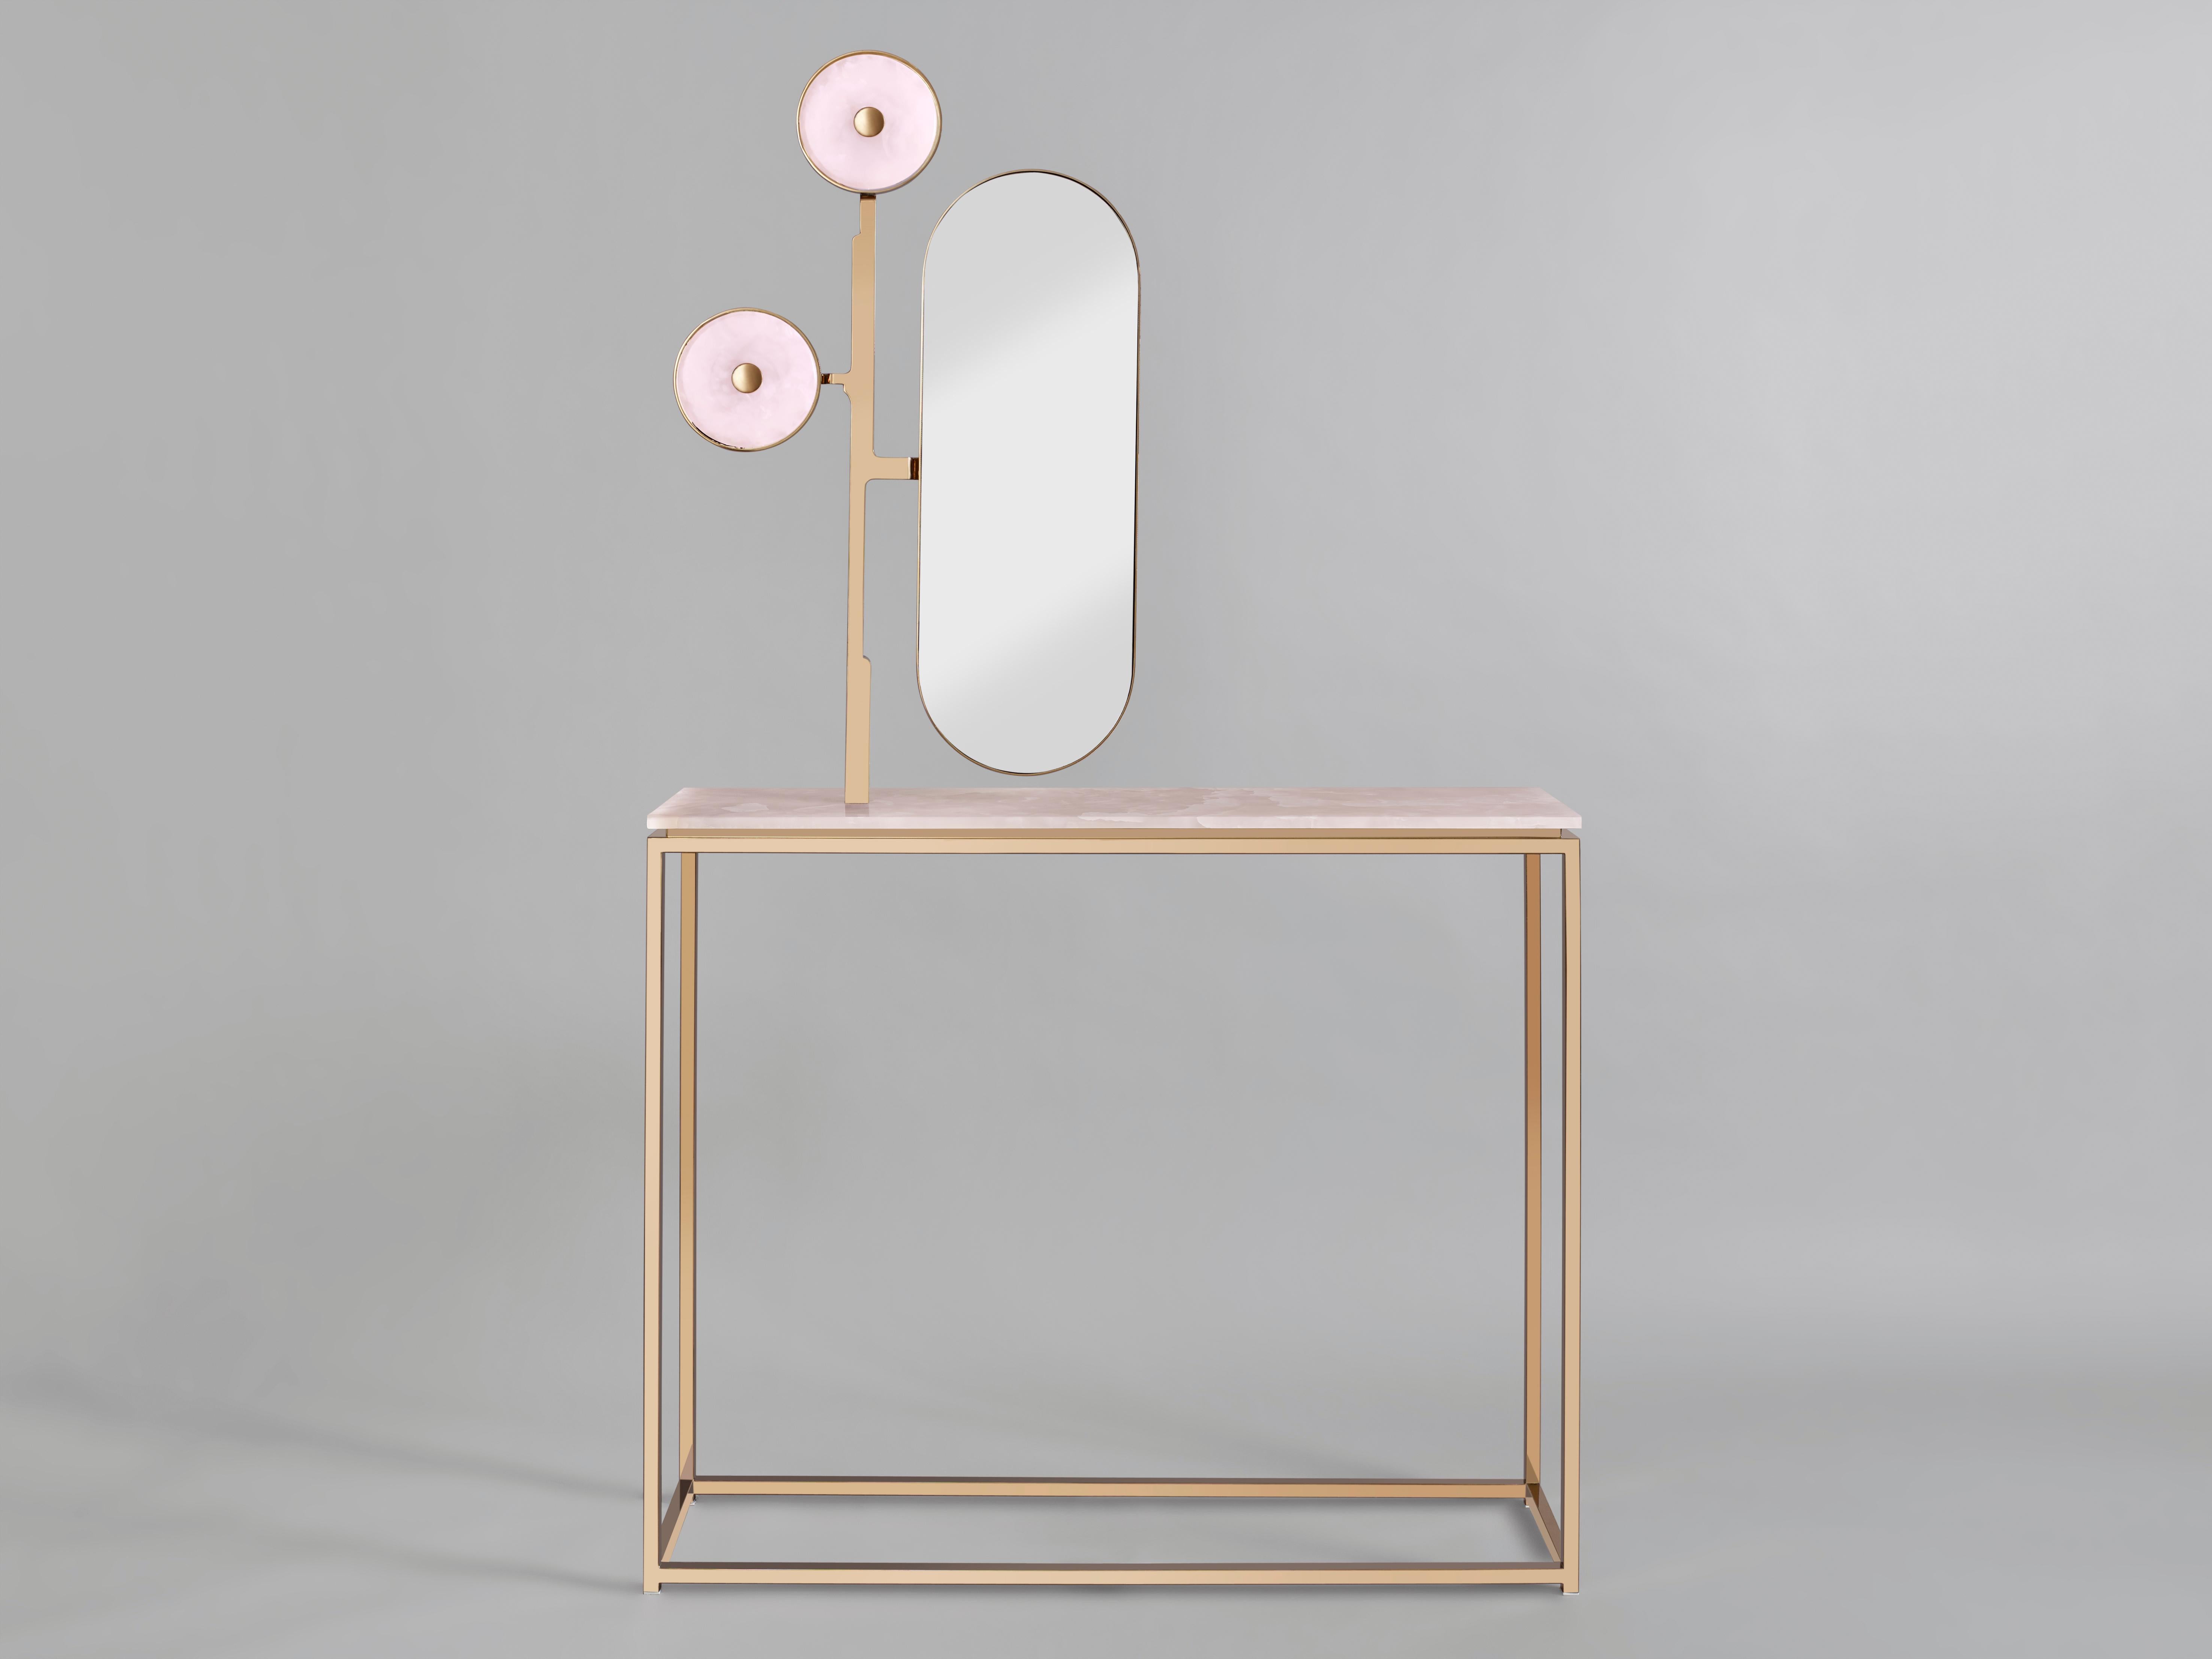 This 'JinShi Pink Jade' glamorous luminous console by acclaimed design duo Studio MVW is a true jewel for the home. It encompasses a top sculpted in natural pink jade, an exceptional gemstone with a sumptuous powder transparency, a mirror as well as